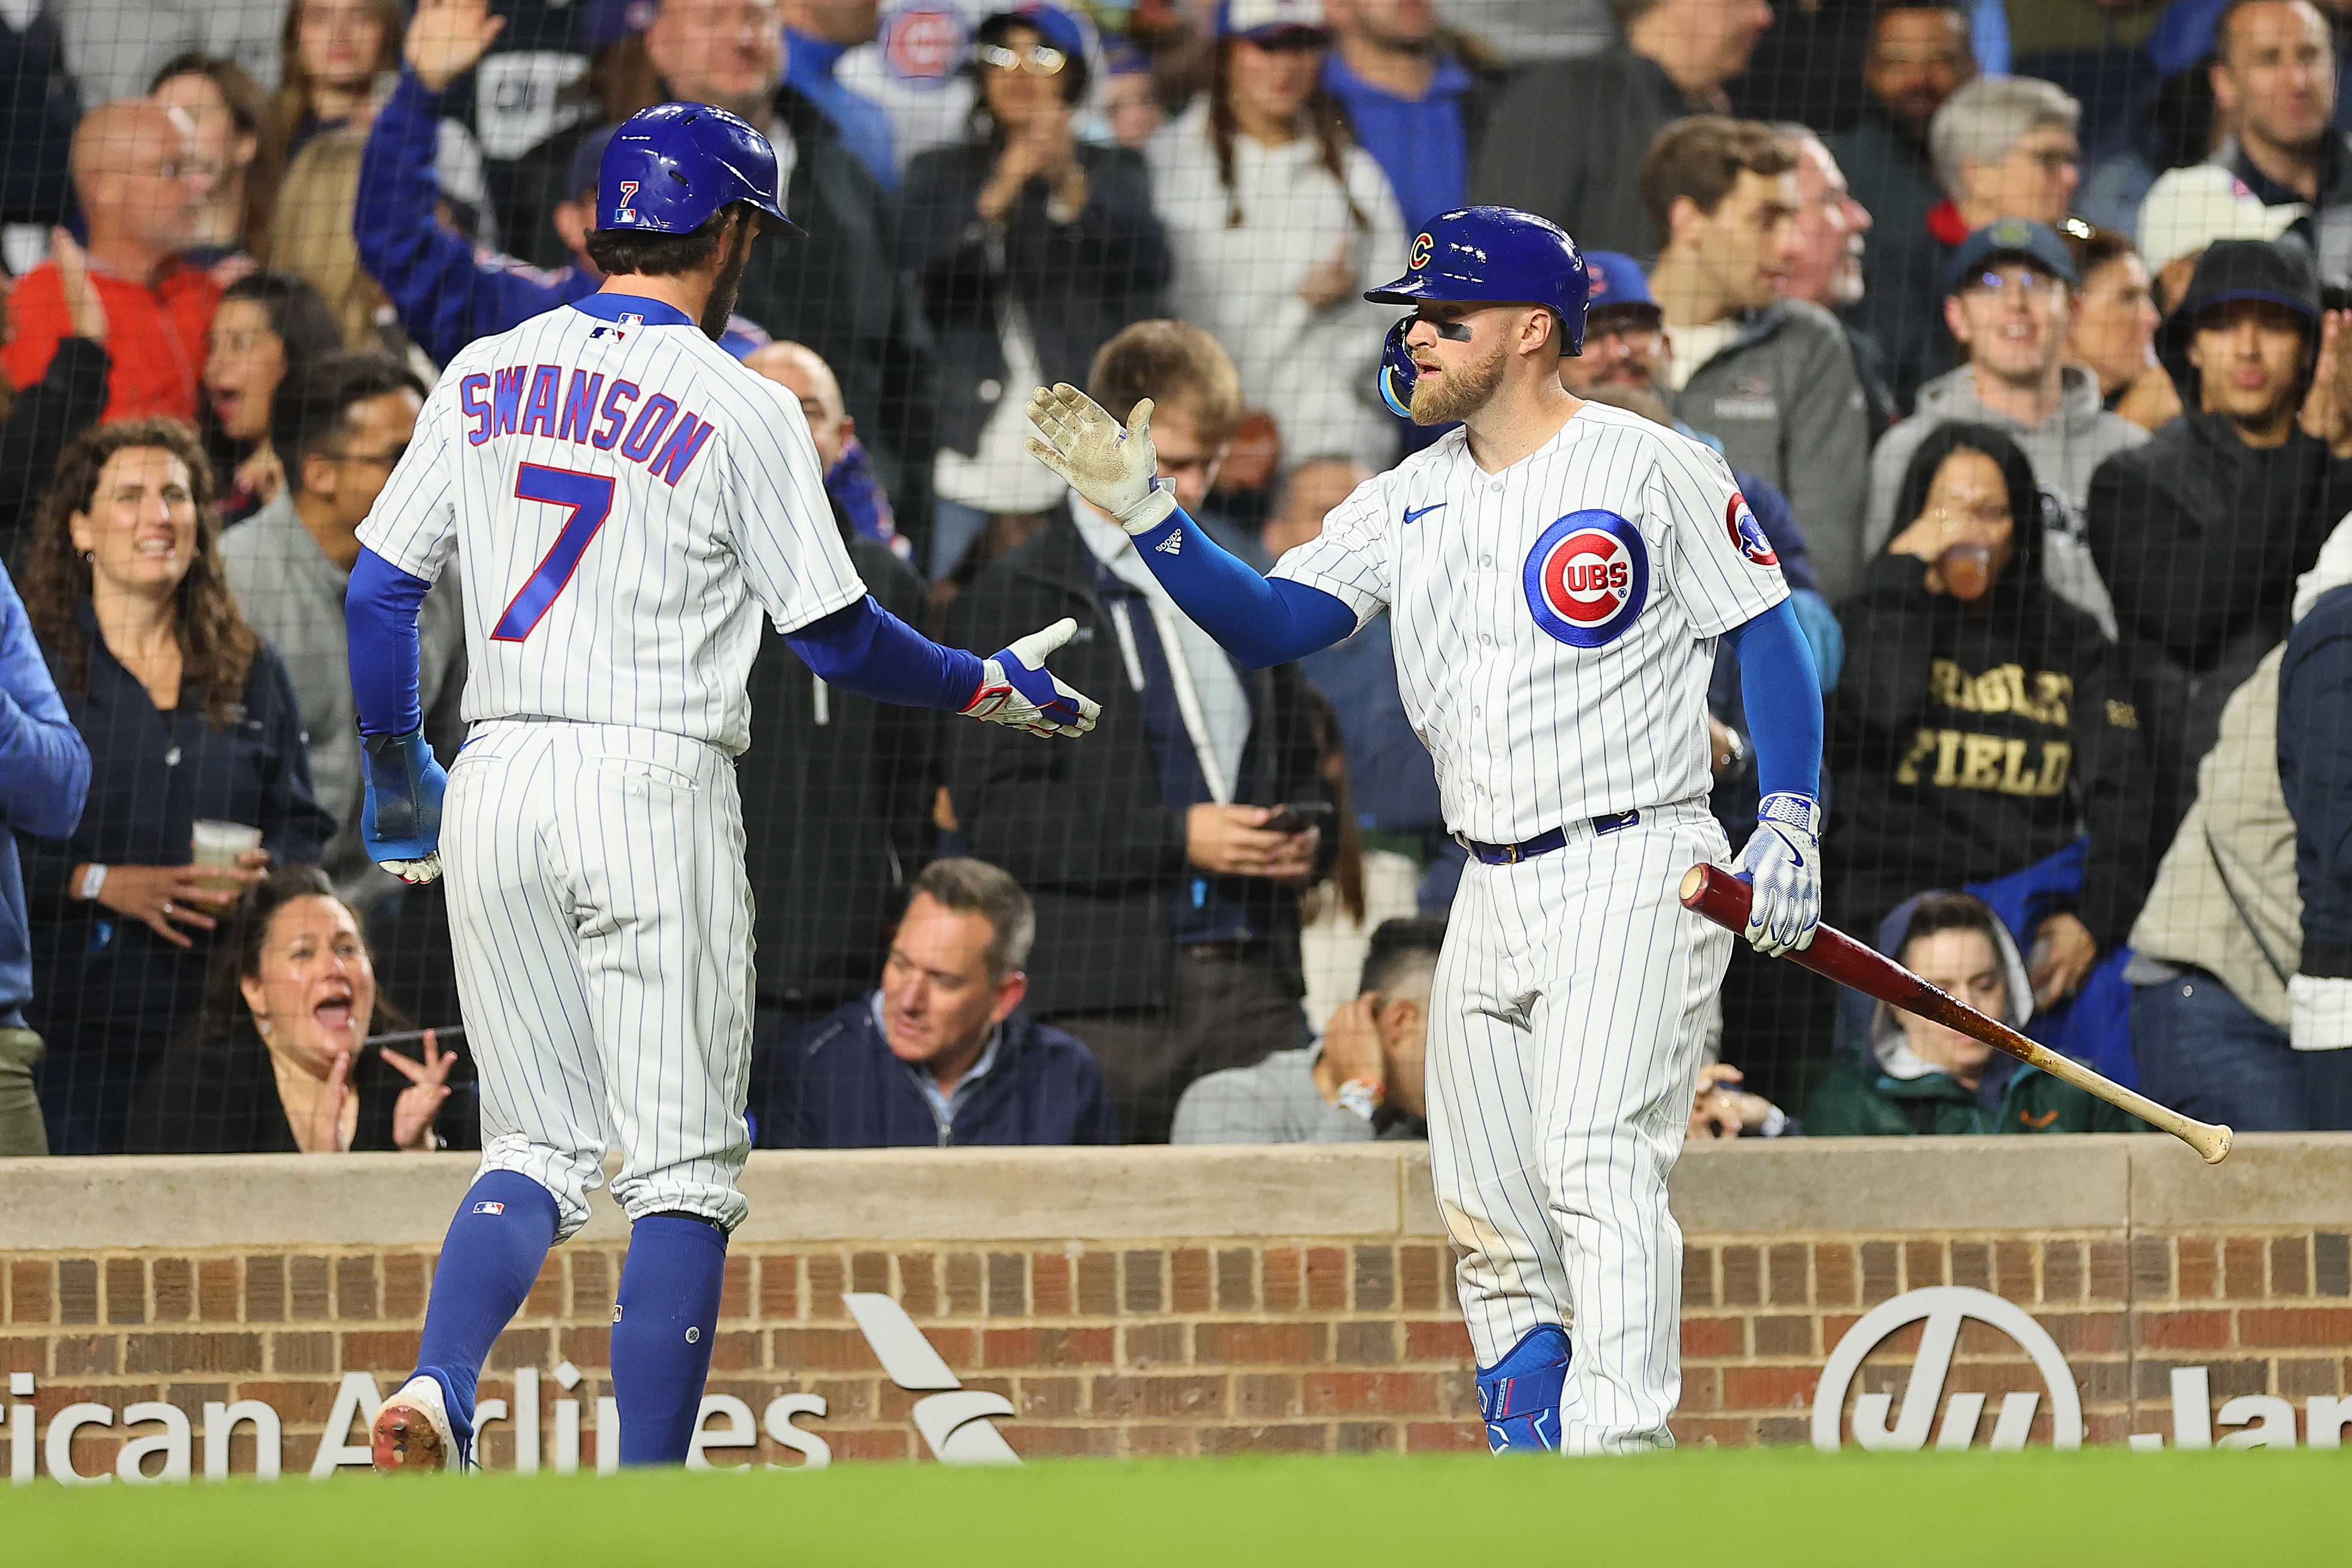 Christopher Morel homers as Chicago Cubs beat Baltimore Orioles 10